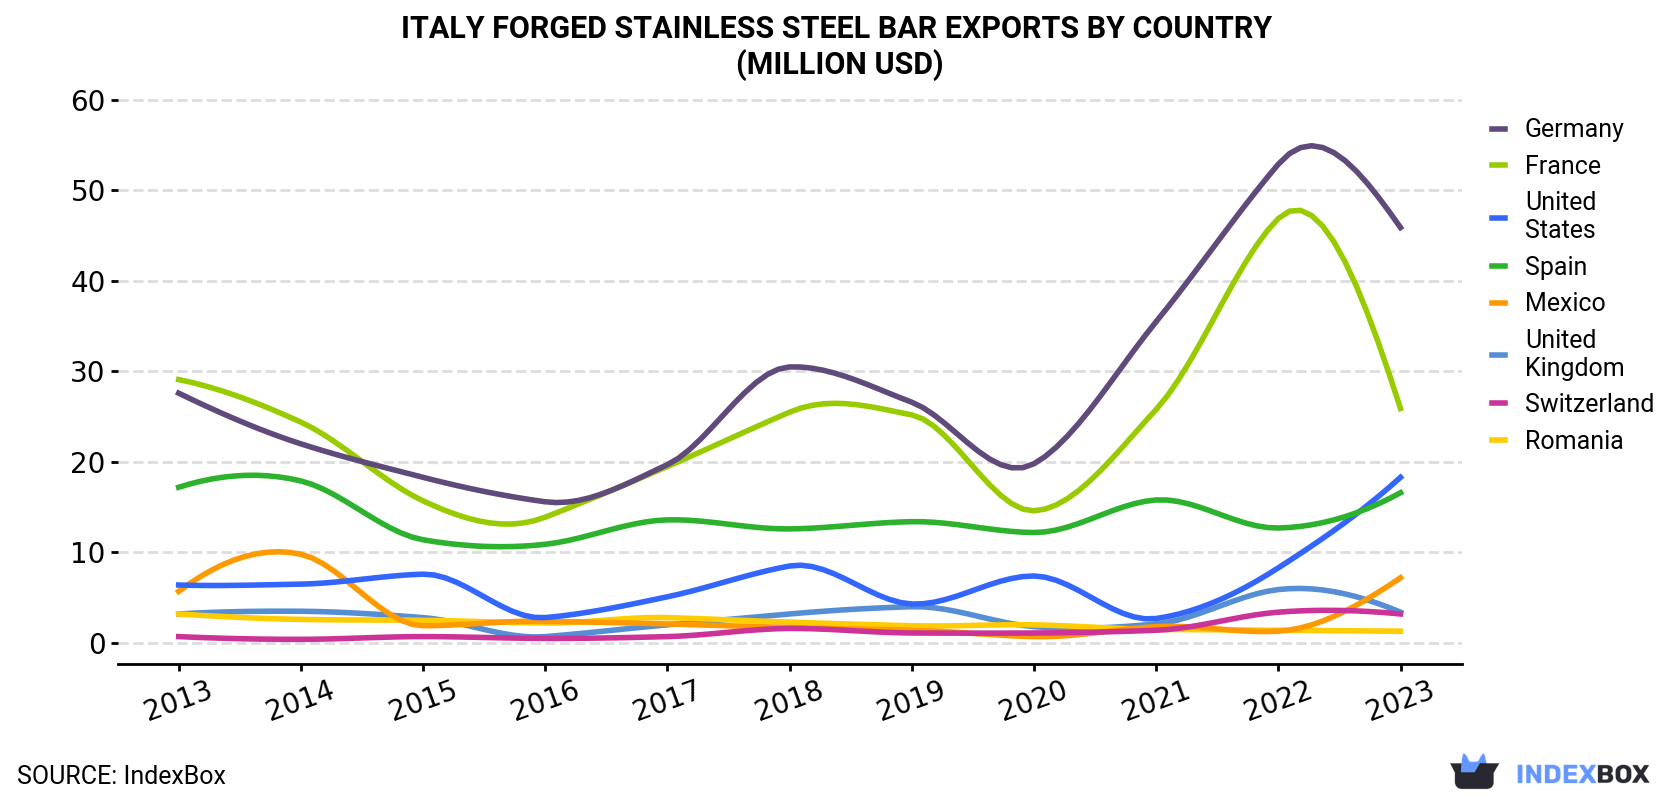 Italy Forged Stainless Steel Bar Exports By Country (Million USD)